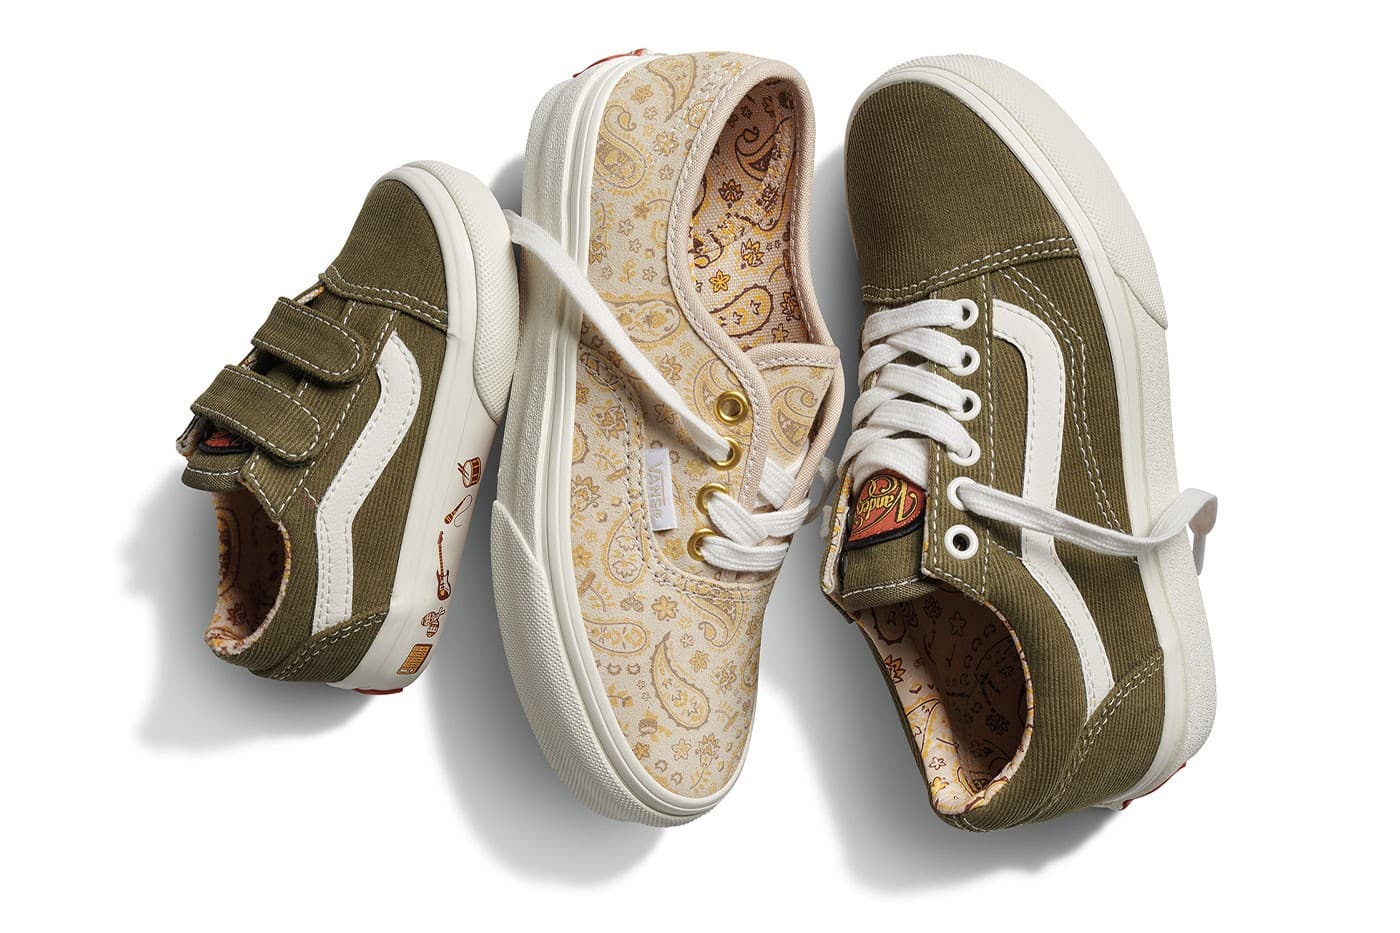 vans-anderson-paak-collab-collection-release-info-003.jpg